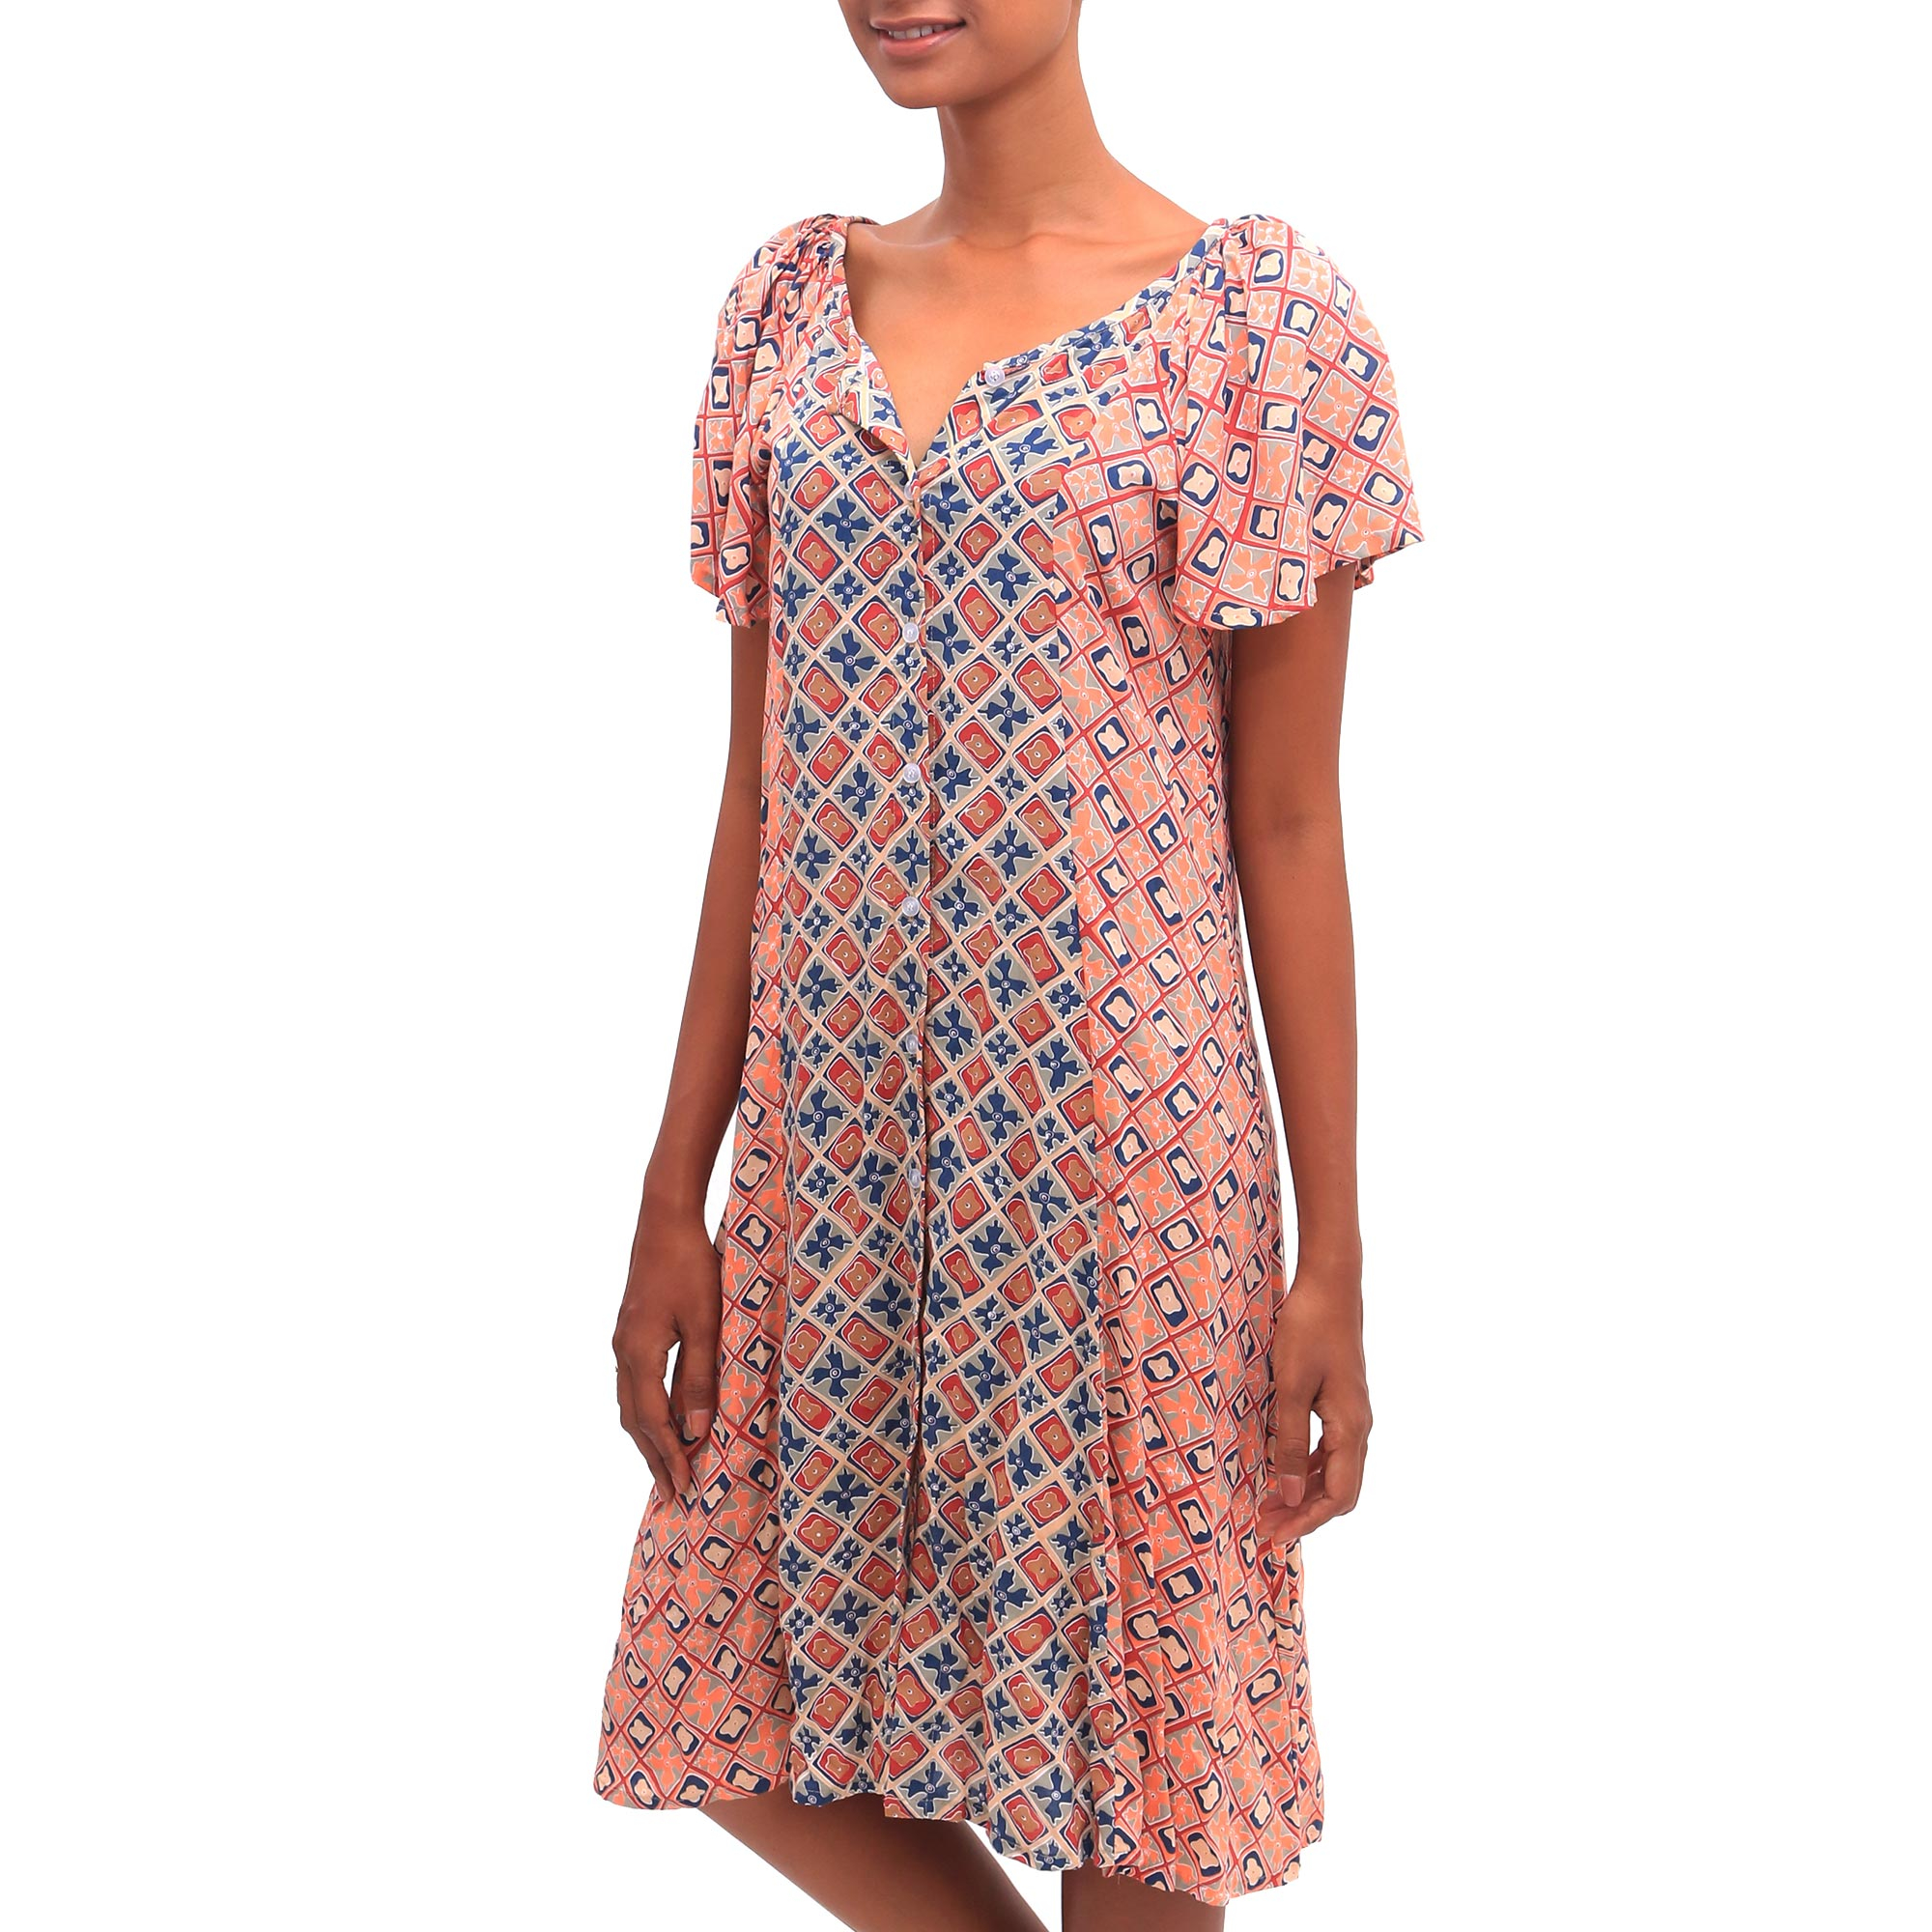 UNICEF Market | Chili and Azure Printed Rayon A-Line Dress from Bali ...